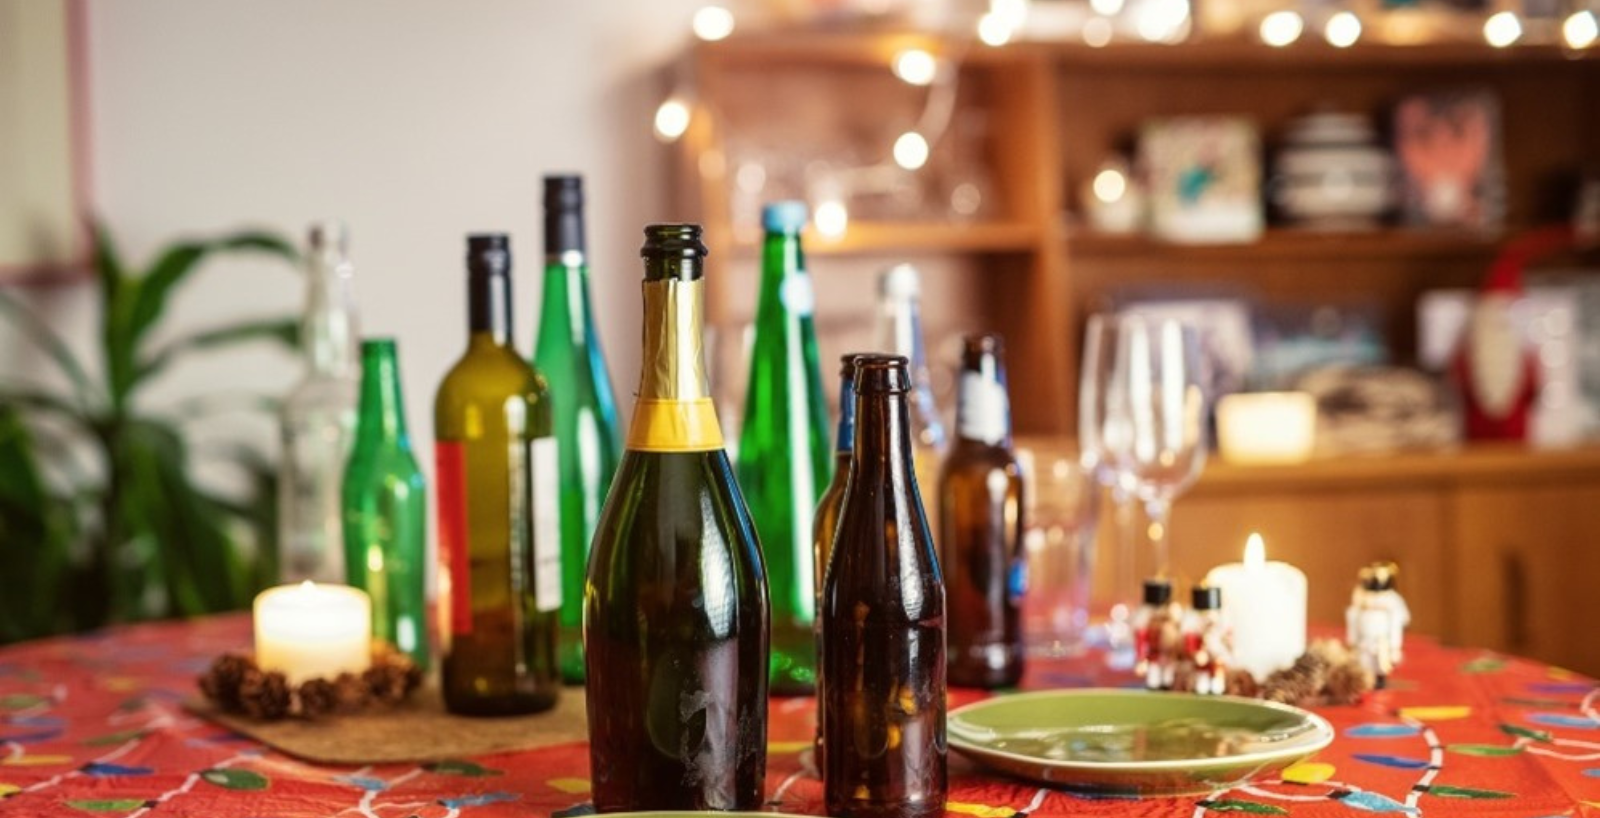 empty bottles on table - illustrating recycling & waste collection arrangements over Christmas